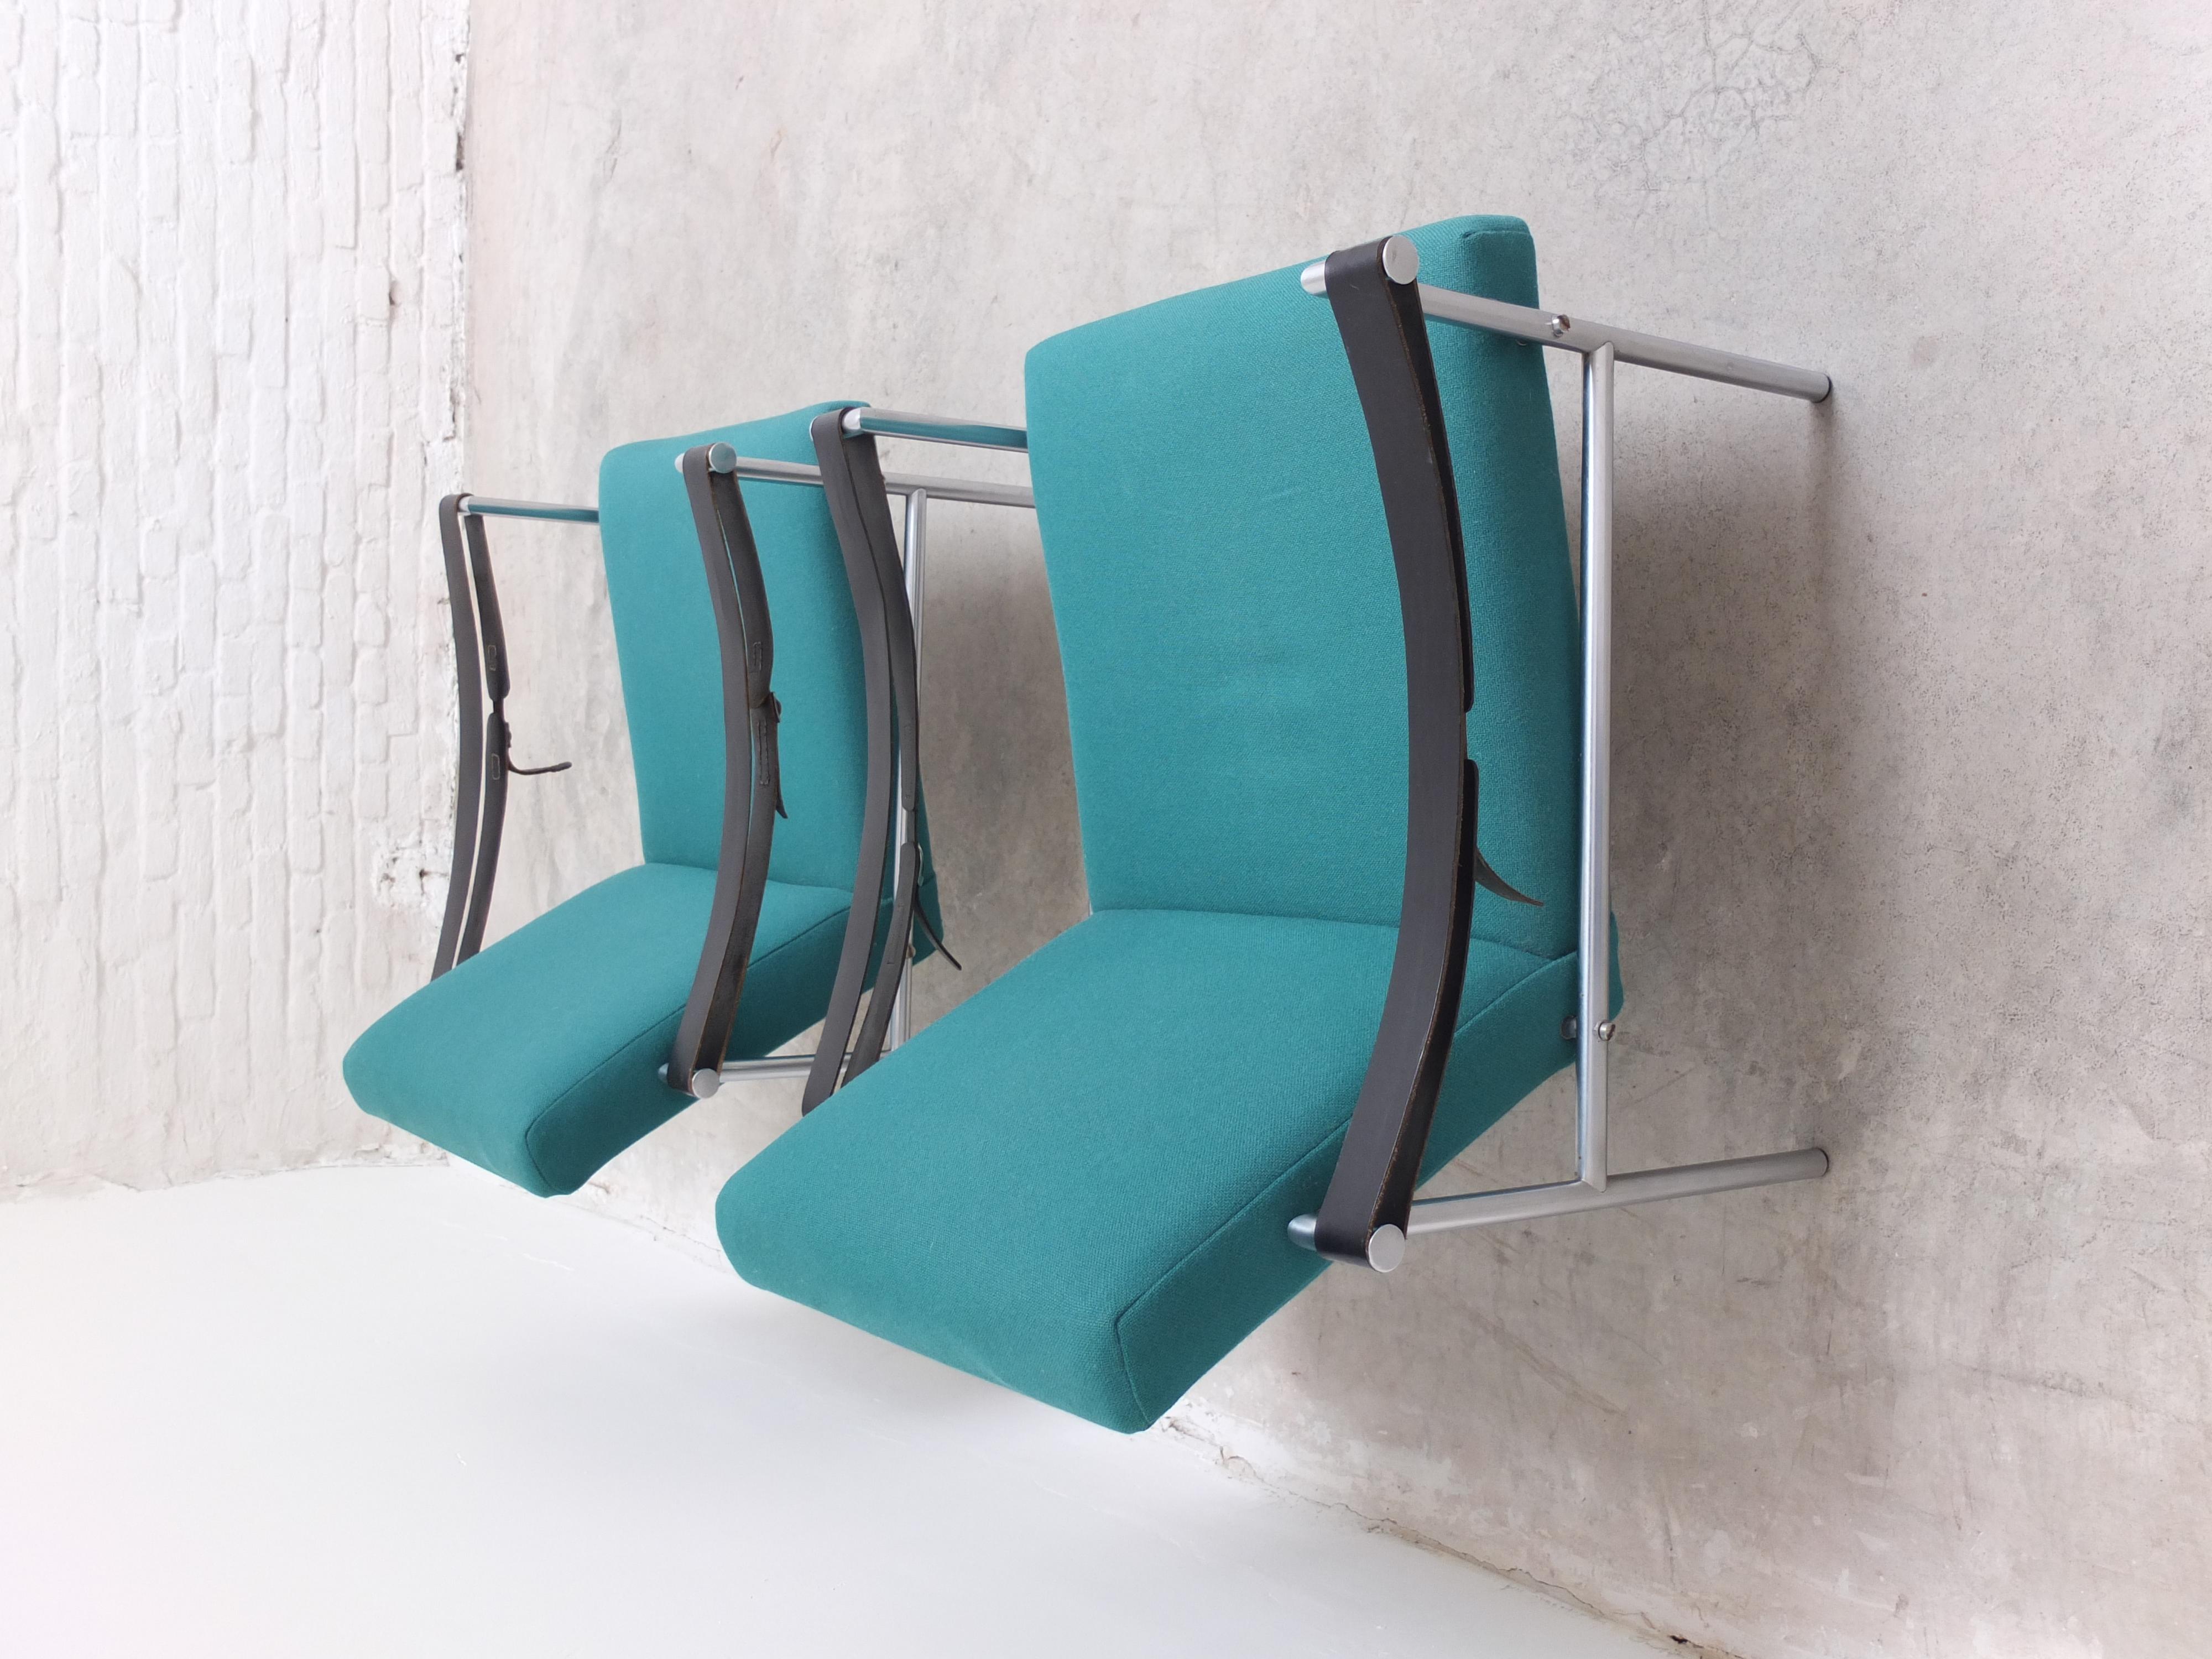 20th Century Pair of 'SZ08' Lounge Chairs by Martin Visser for 't Spectrum, 1960 For Sale